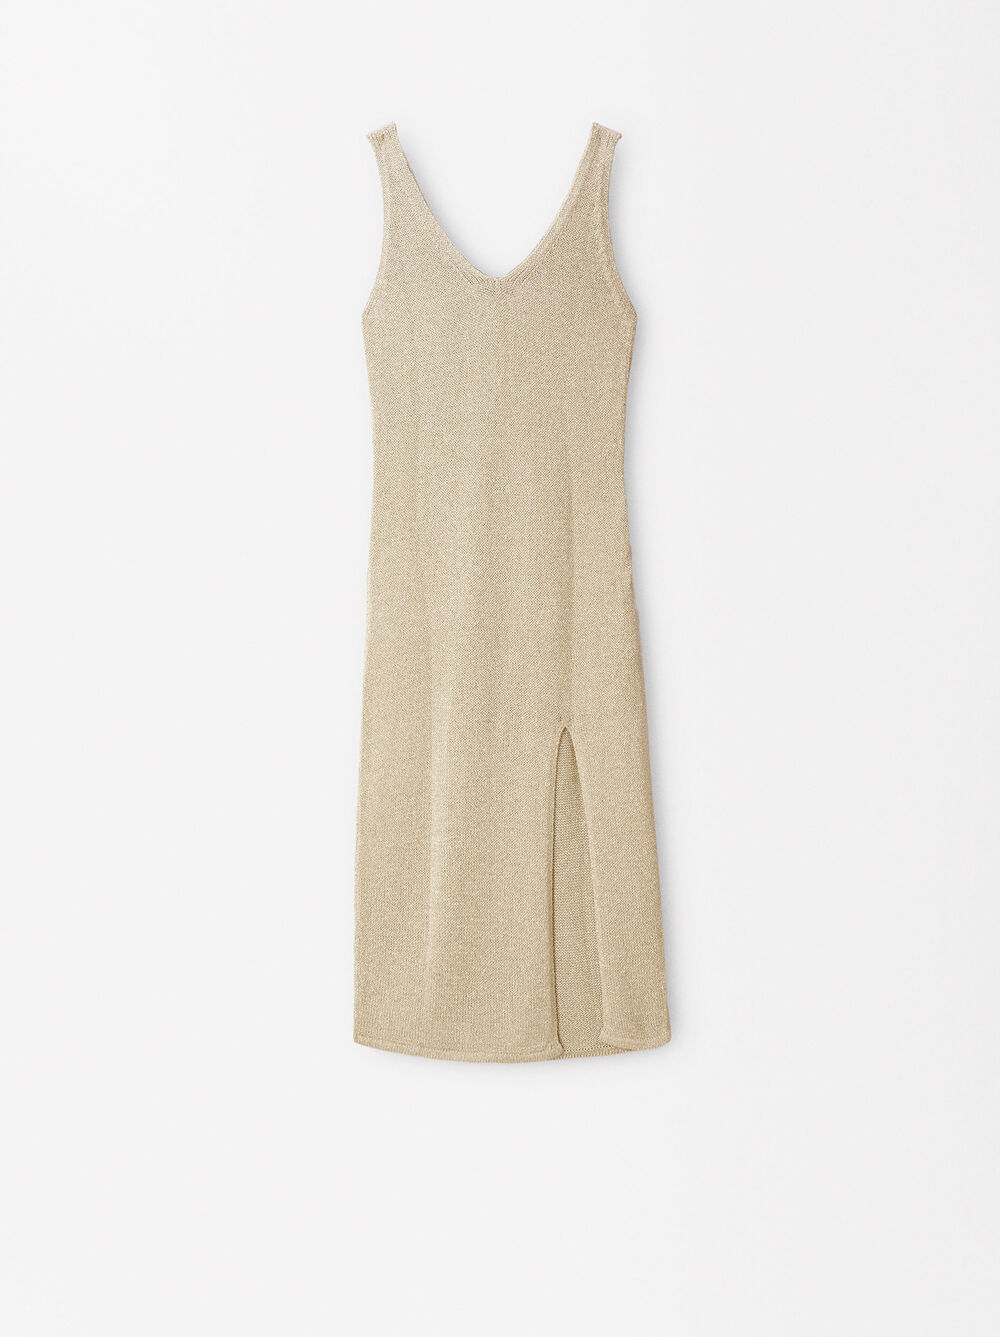 Online Exclusive - Lurex Knitted Dress image number 4.0